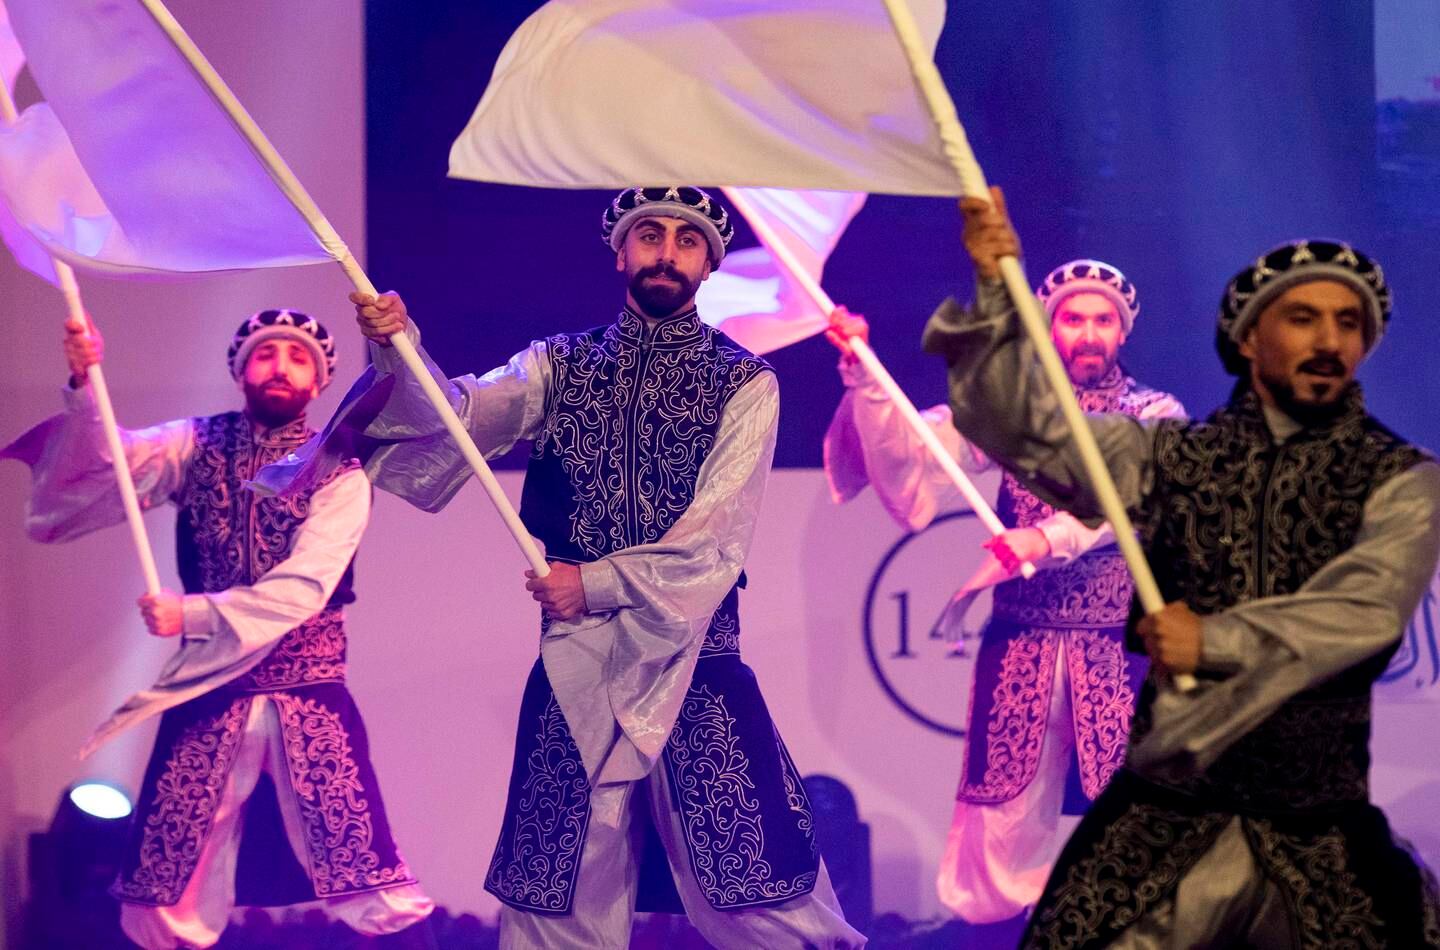 The operetta explored Islamic values in the context of the Prophet Mohammed's life, and the impact they have had on society ever since